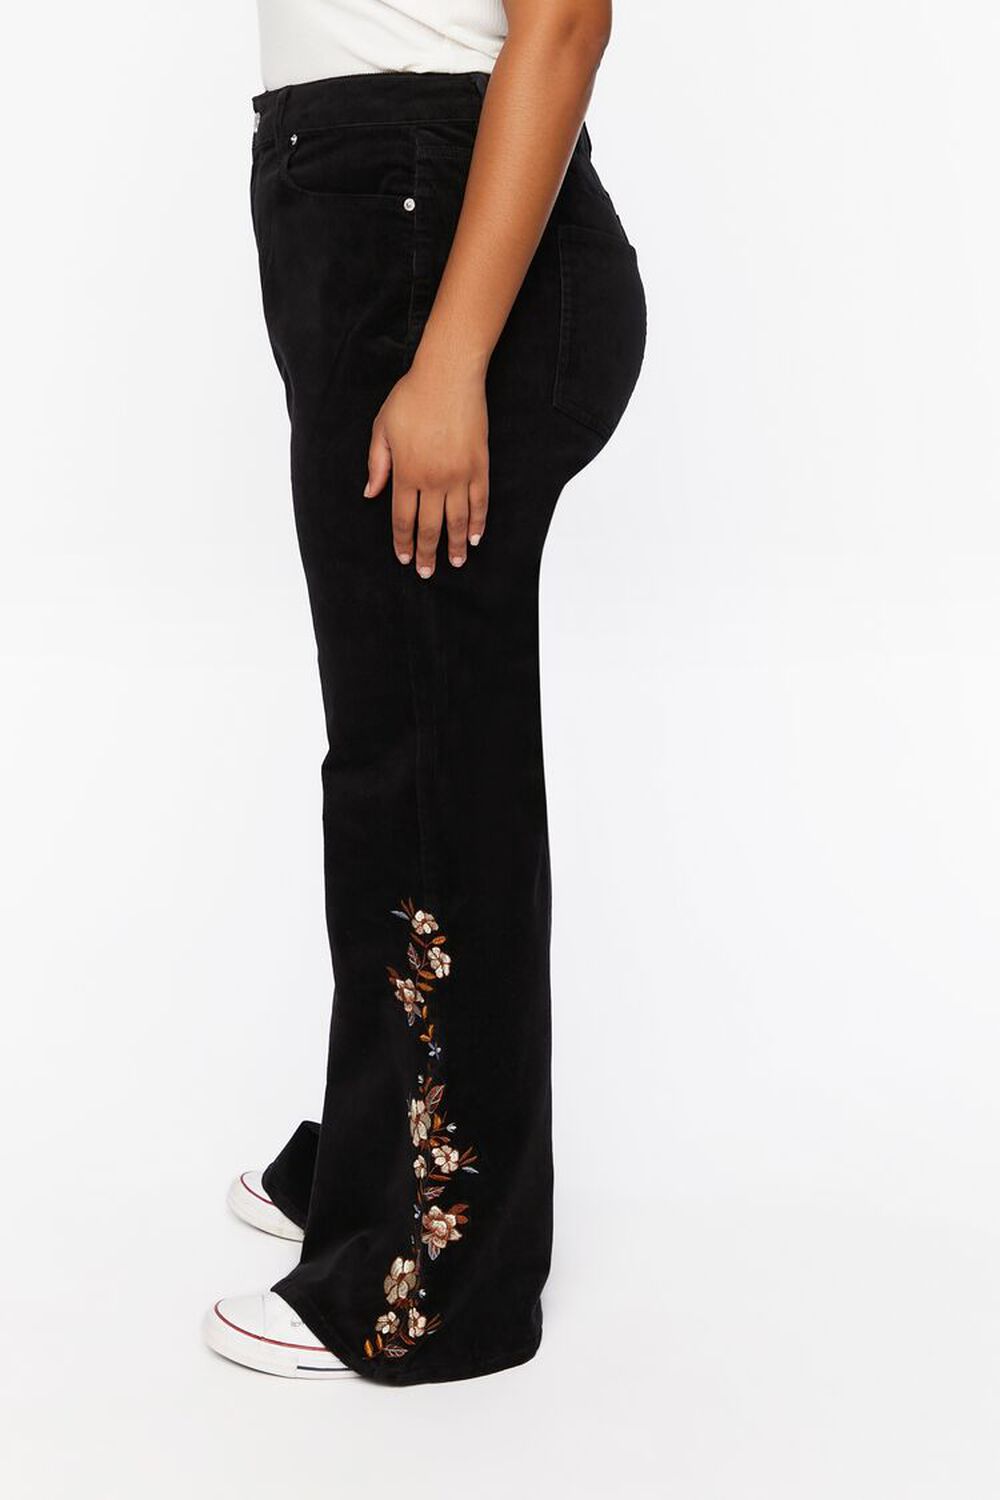 BLACK/MULTI Plus Size Floral Embroidered Flare Pants, image 3